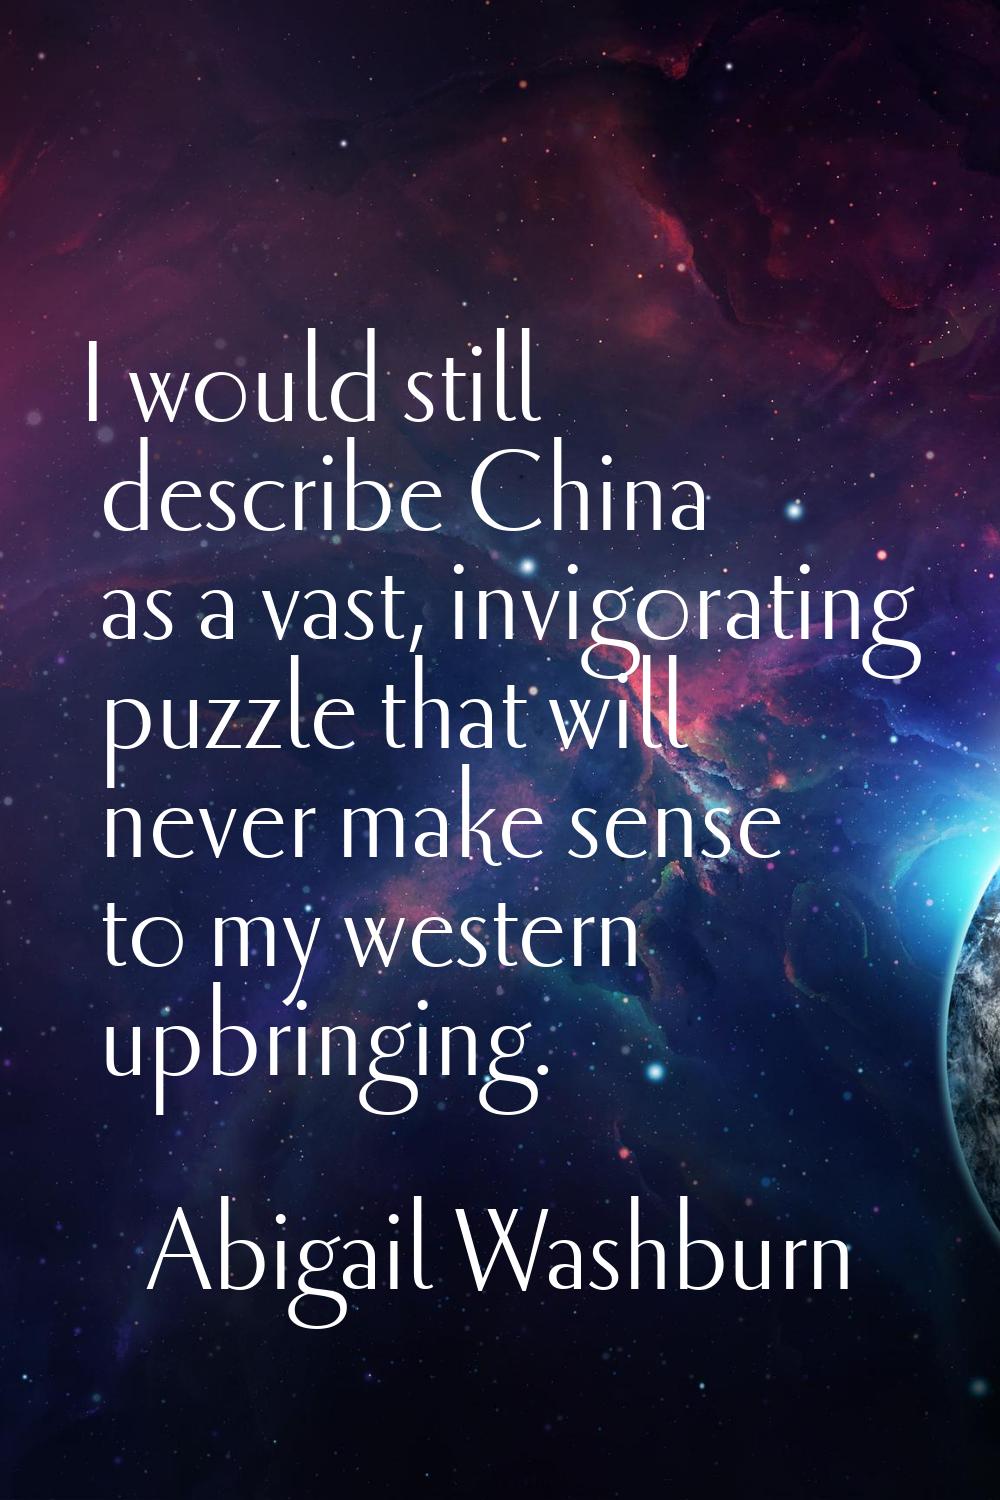 I would still describe China as a vast, invigorating puzzle that will never make sense to my wester